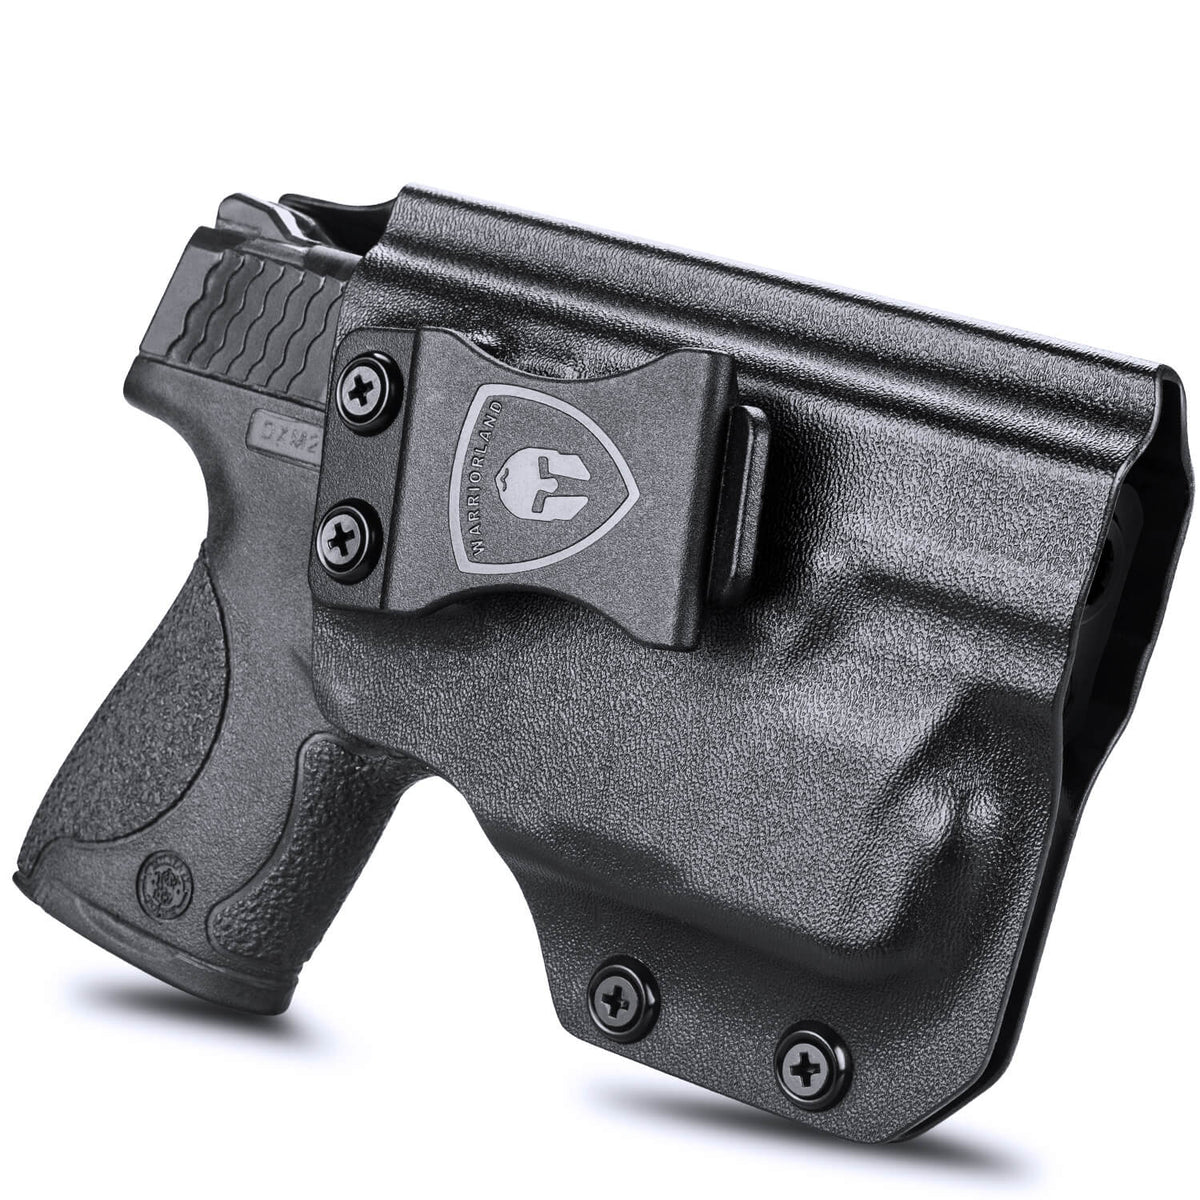  QuickShell KYDEX Holster Kit - (RH-IWB/LH-OWB) - (Basic Shell  Only/No Hardware) - (USA Made) - (by Holstersmith) - for S&W Shield 9/40 :  Sports & Outdoors